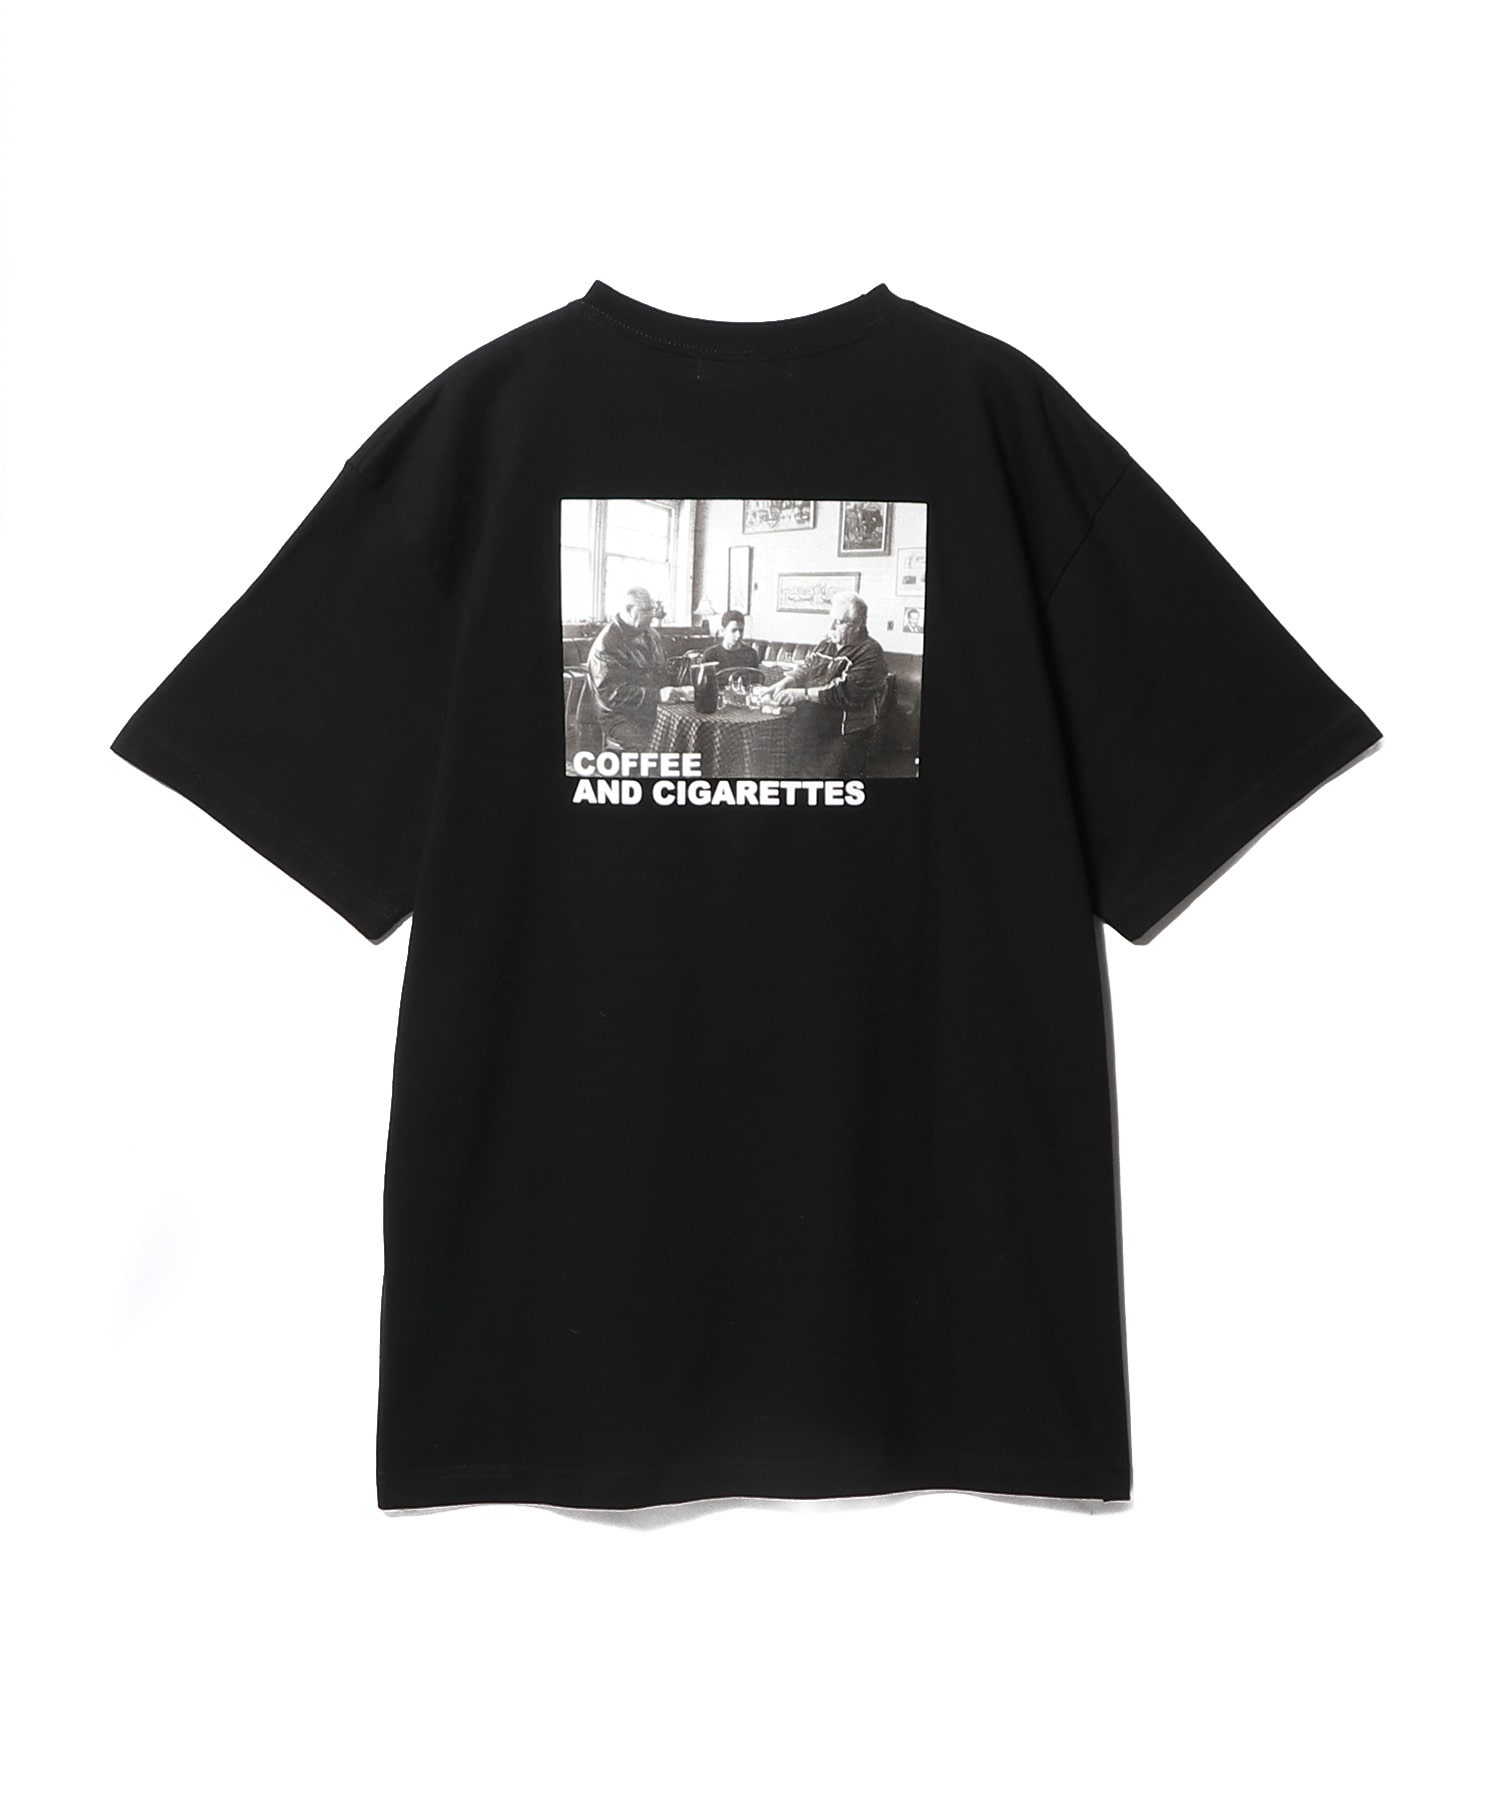 ”Coffee and Cigarettes” Men'sバックプリントカットソー＜Jim Jarmusch＞